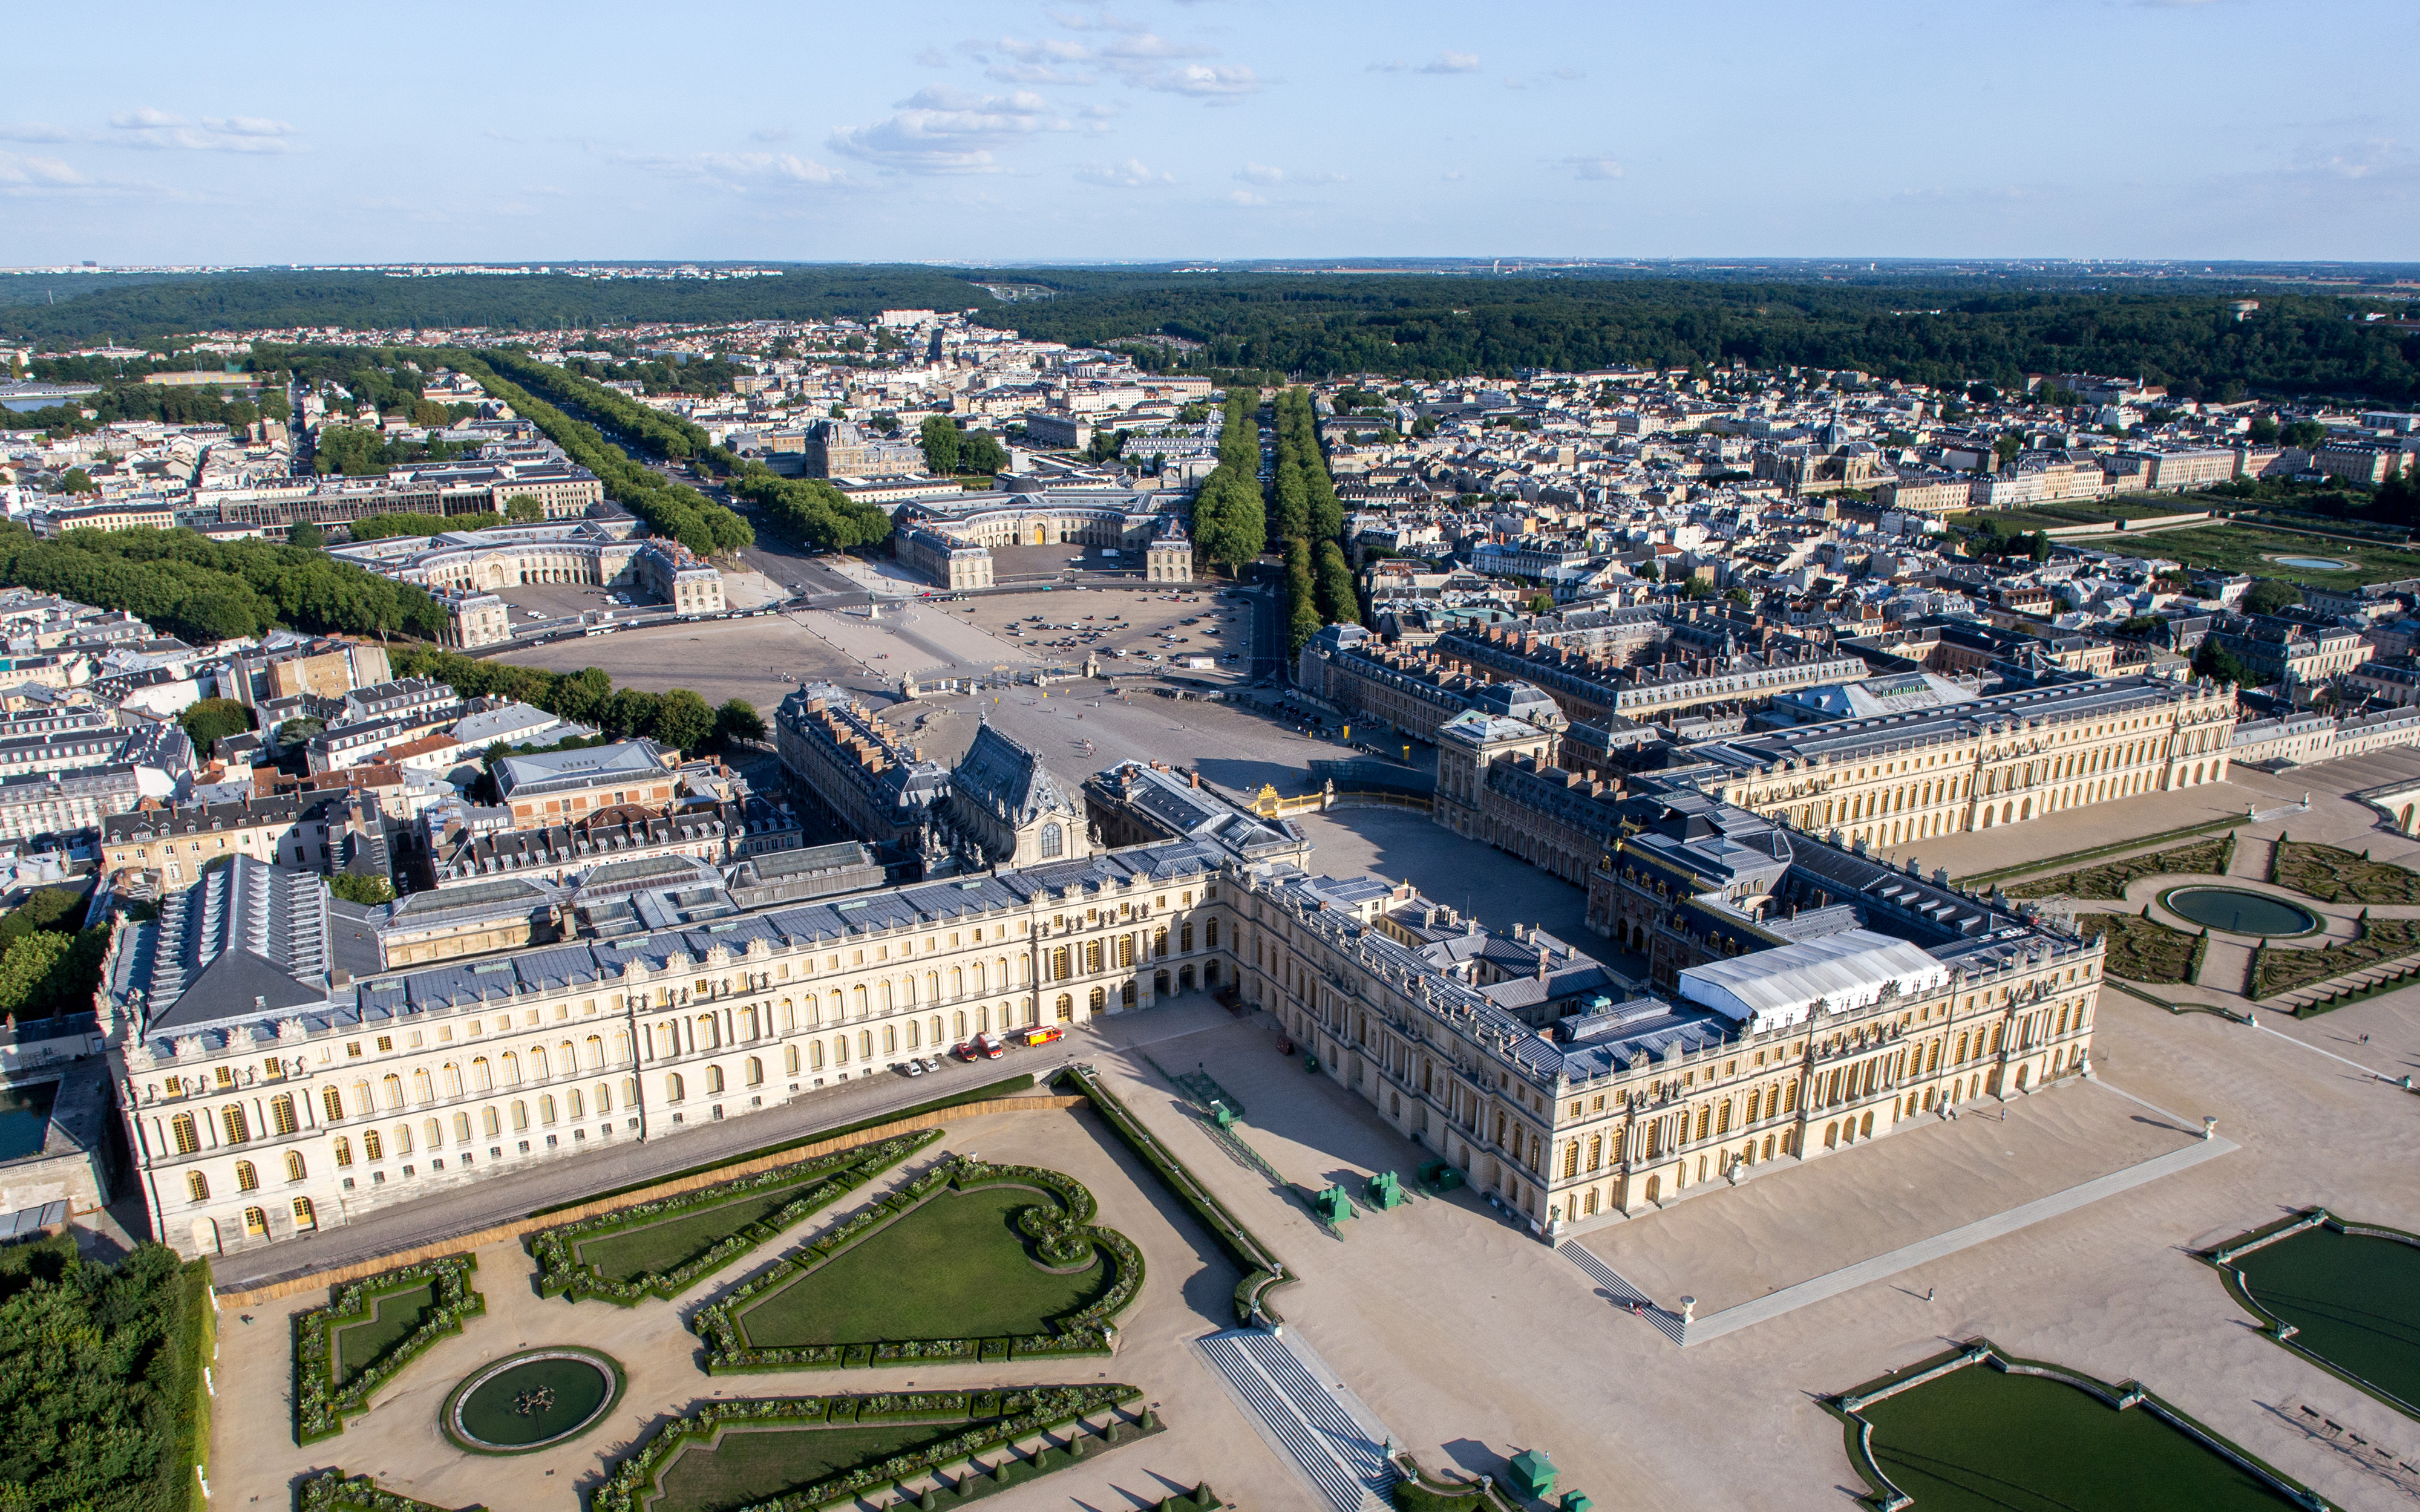 Aerial photograph of Versailles. Photo credit: Wikimedia Commons